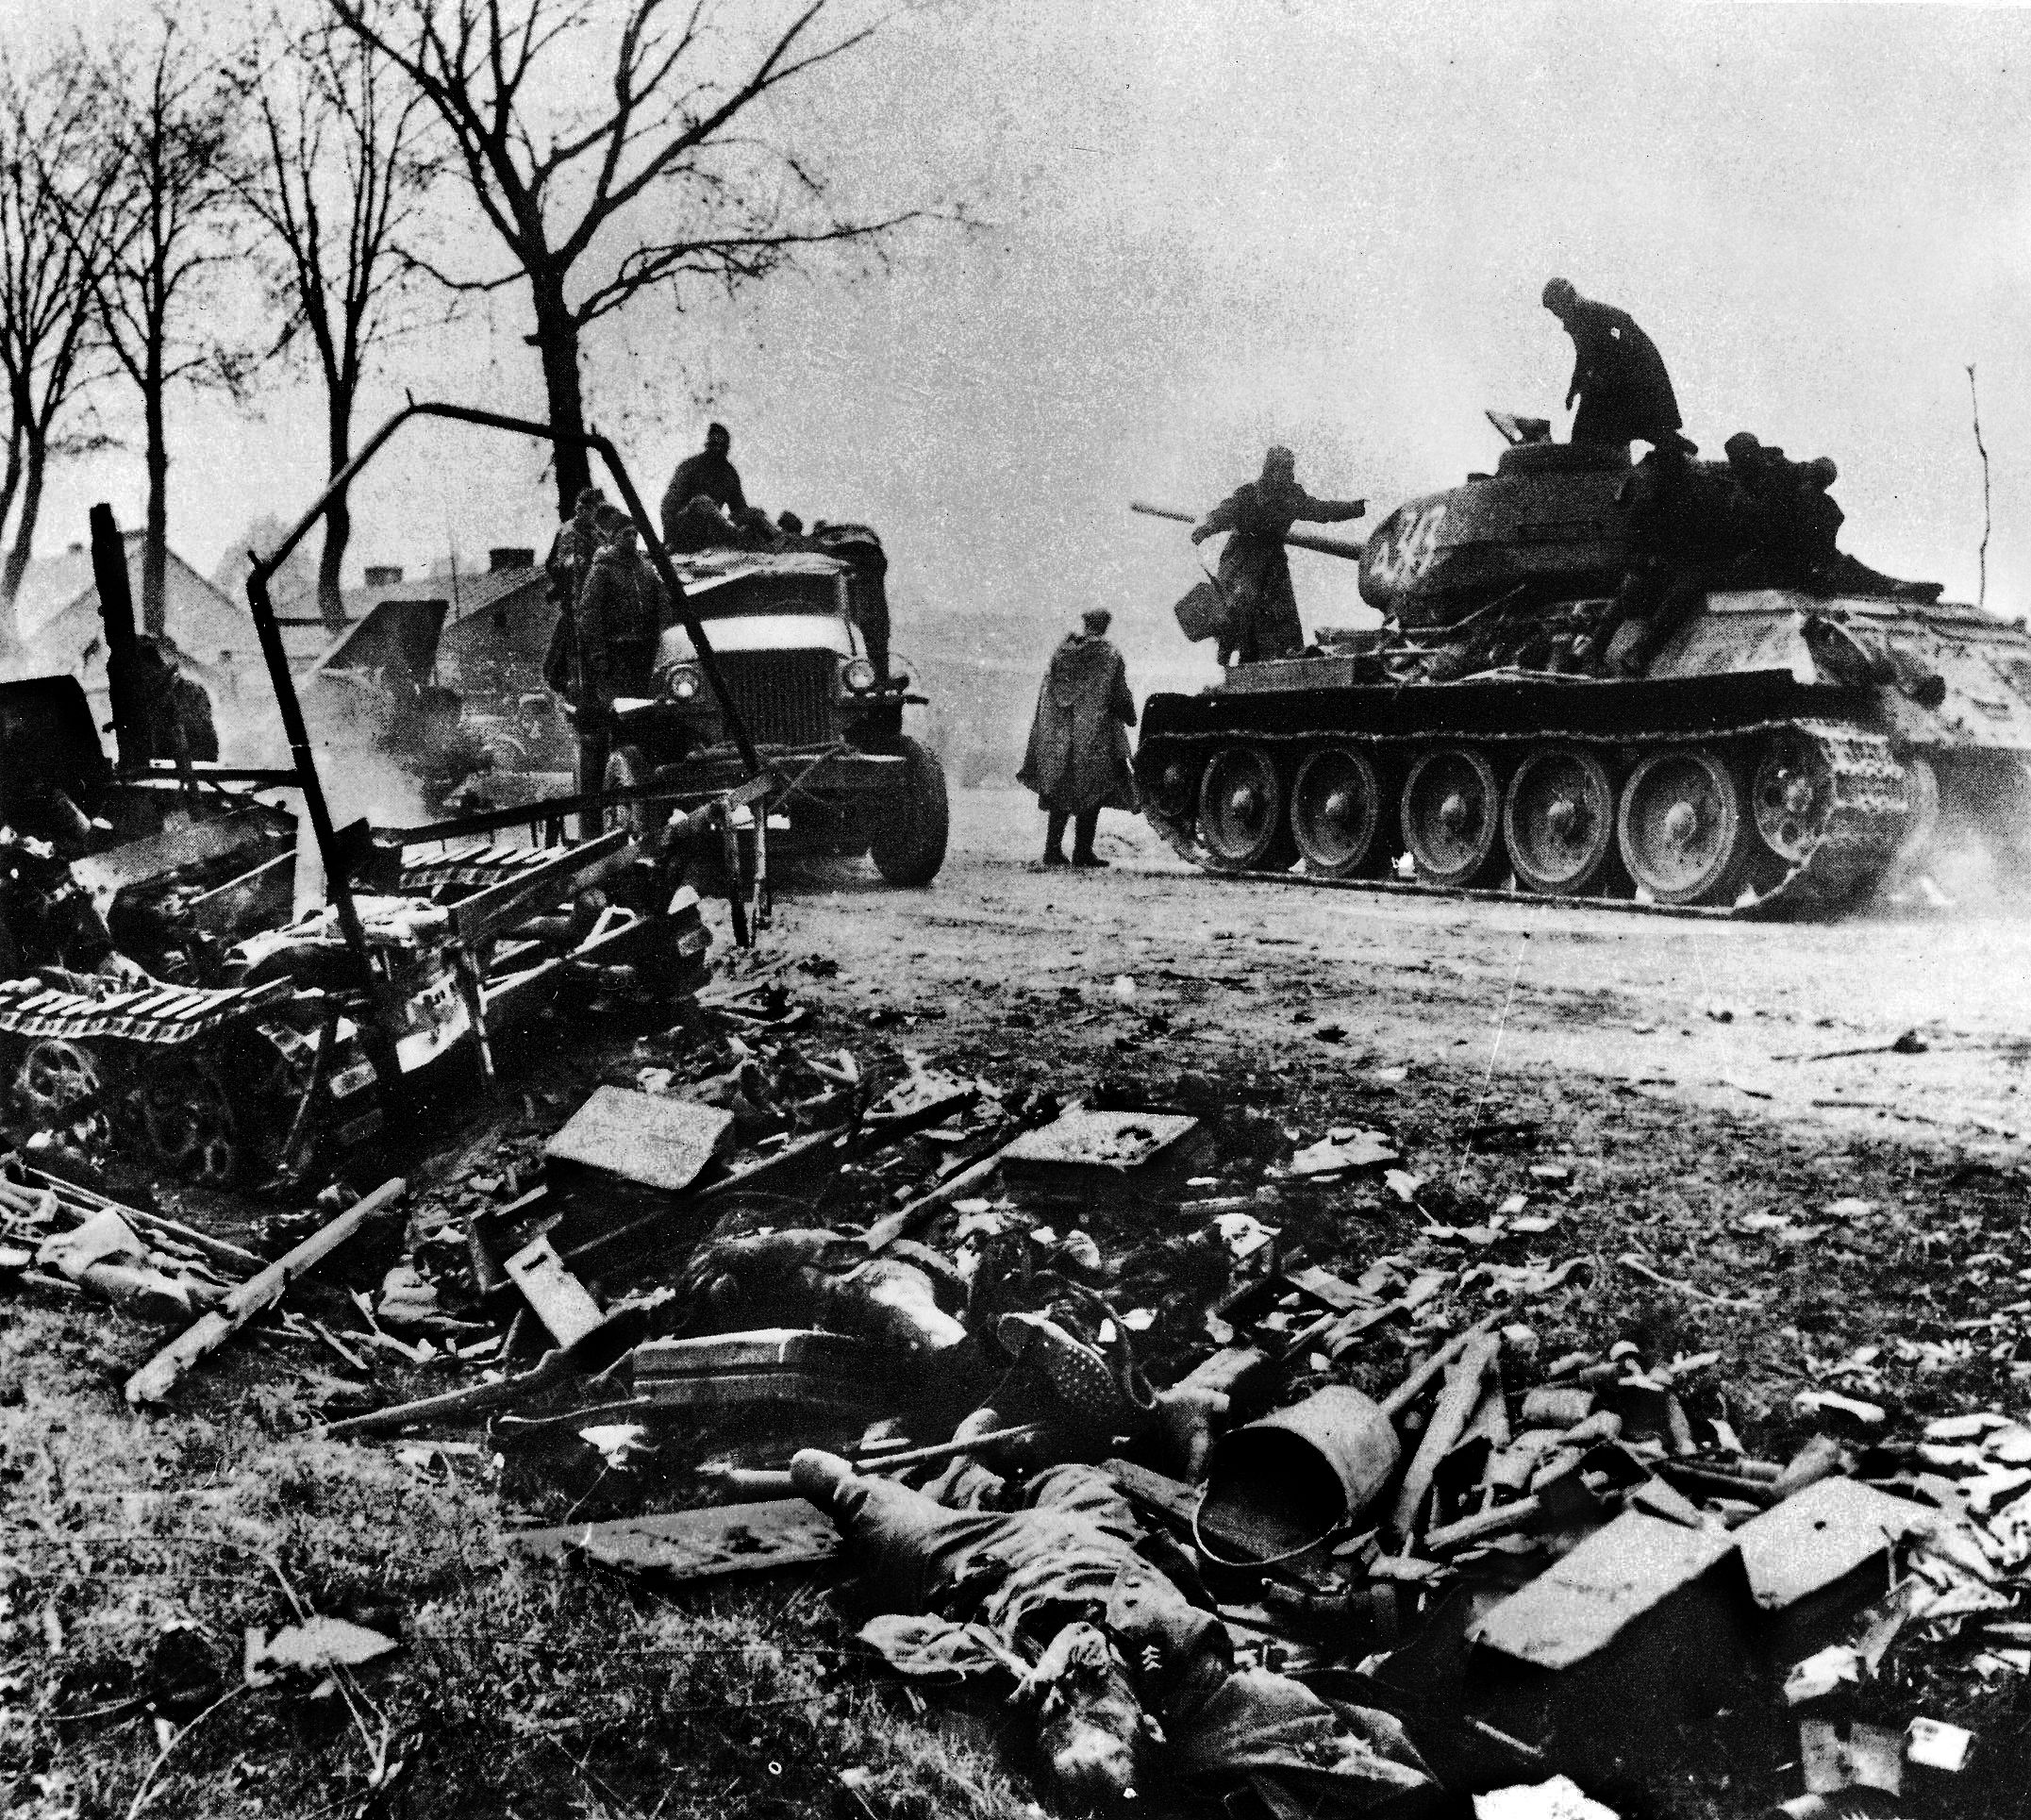 Both the Red Army and the defending Germans sustained heavy casualties during the 1945 Battle of Berlin. In this photo, Soviet soldiers, trucks and tanks prepare to continue the bloody offensive.